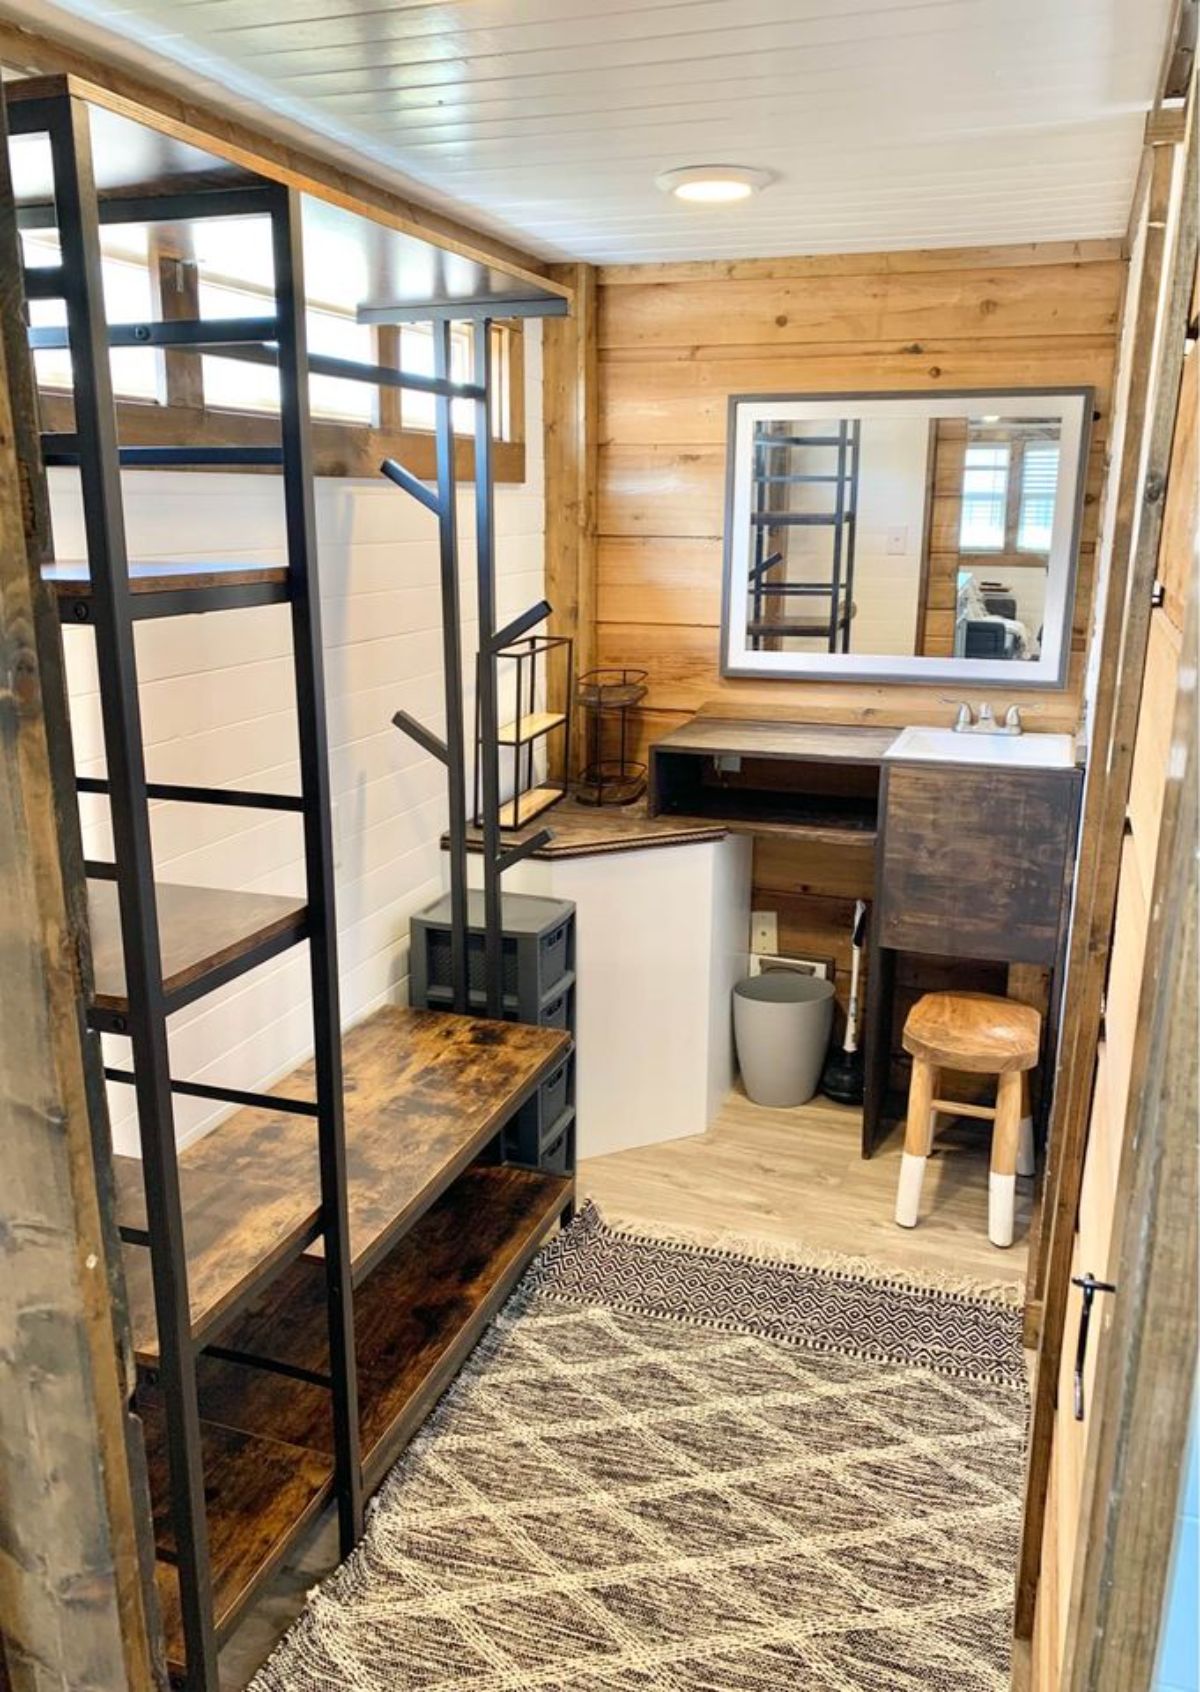 bathroom of 28’ NOAH certified tiny home has sink with vanity and all styled wooden racks